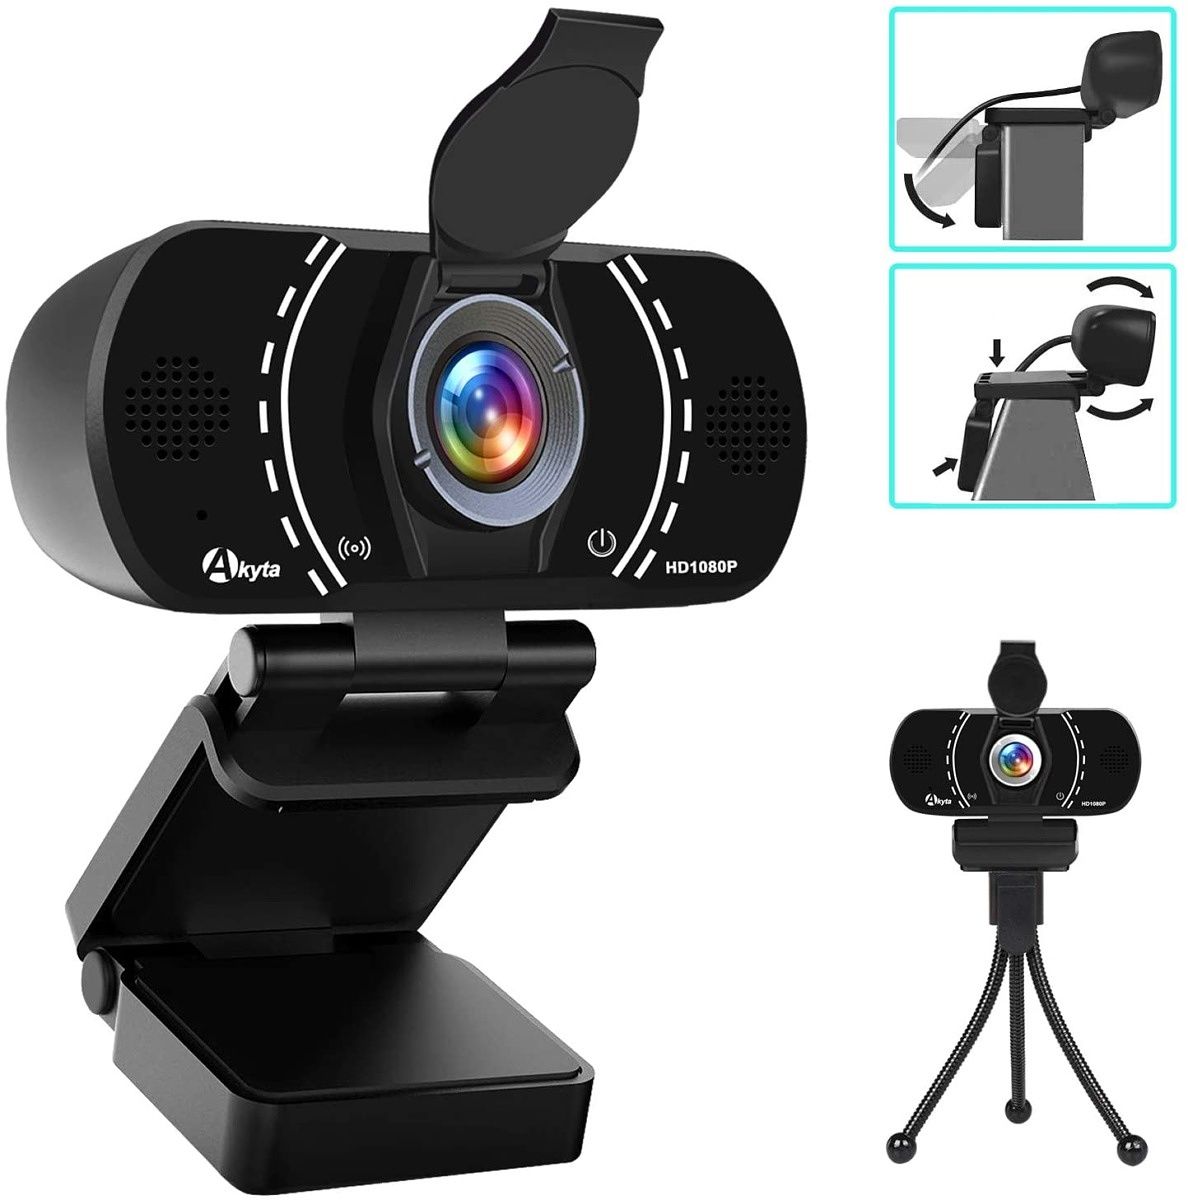 If you want to fit more people into the frame for a group video call, this is the webcam for you. It has a large 110-degree FoV and comes with a privacy cover and a tripod in case you don't want to mount it on your monitor.